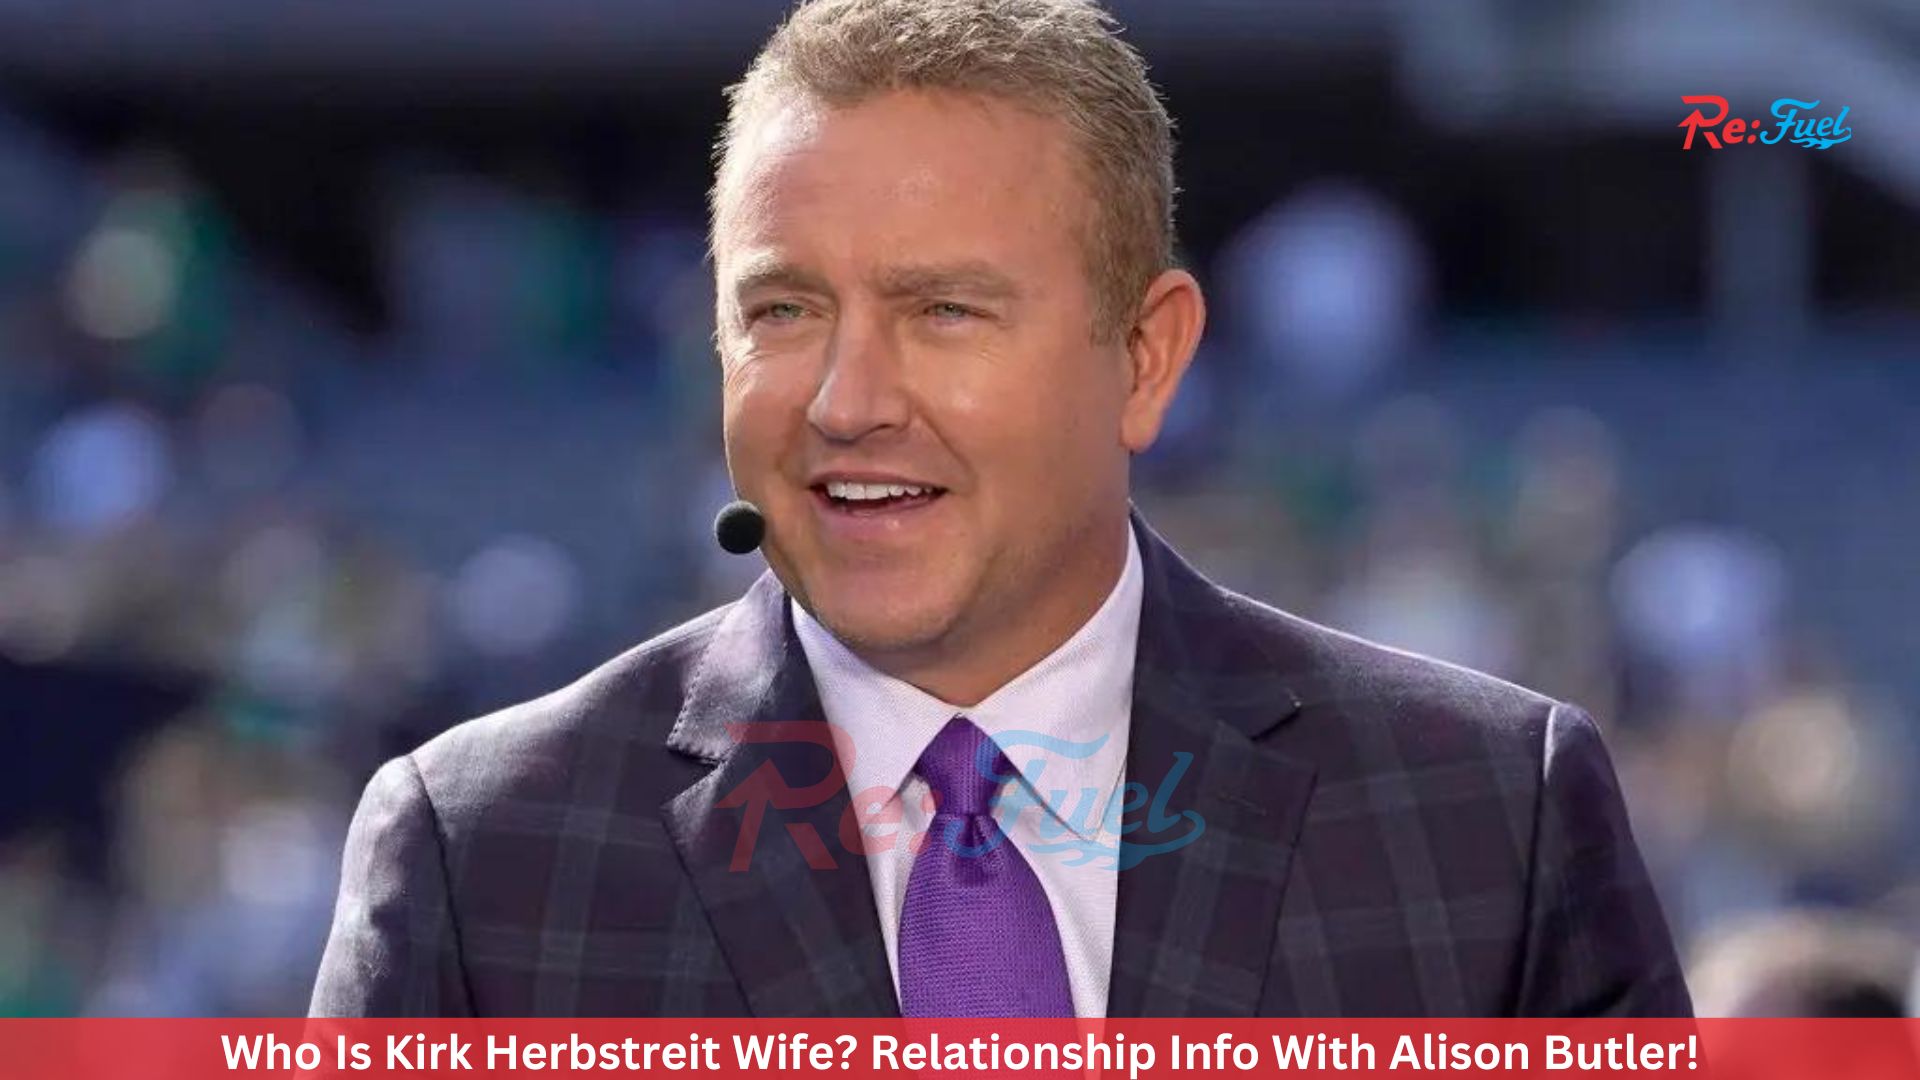 Who Is Kirk Herbstreit Wife? Relationship Info With Alison Butler!